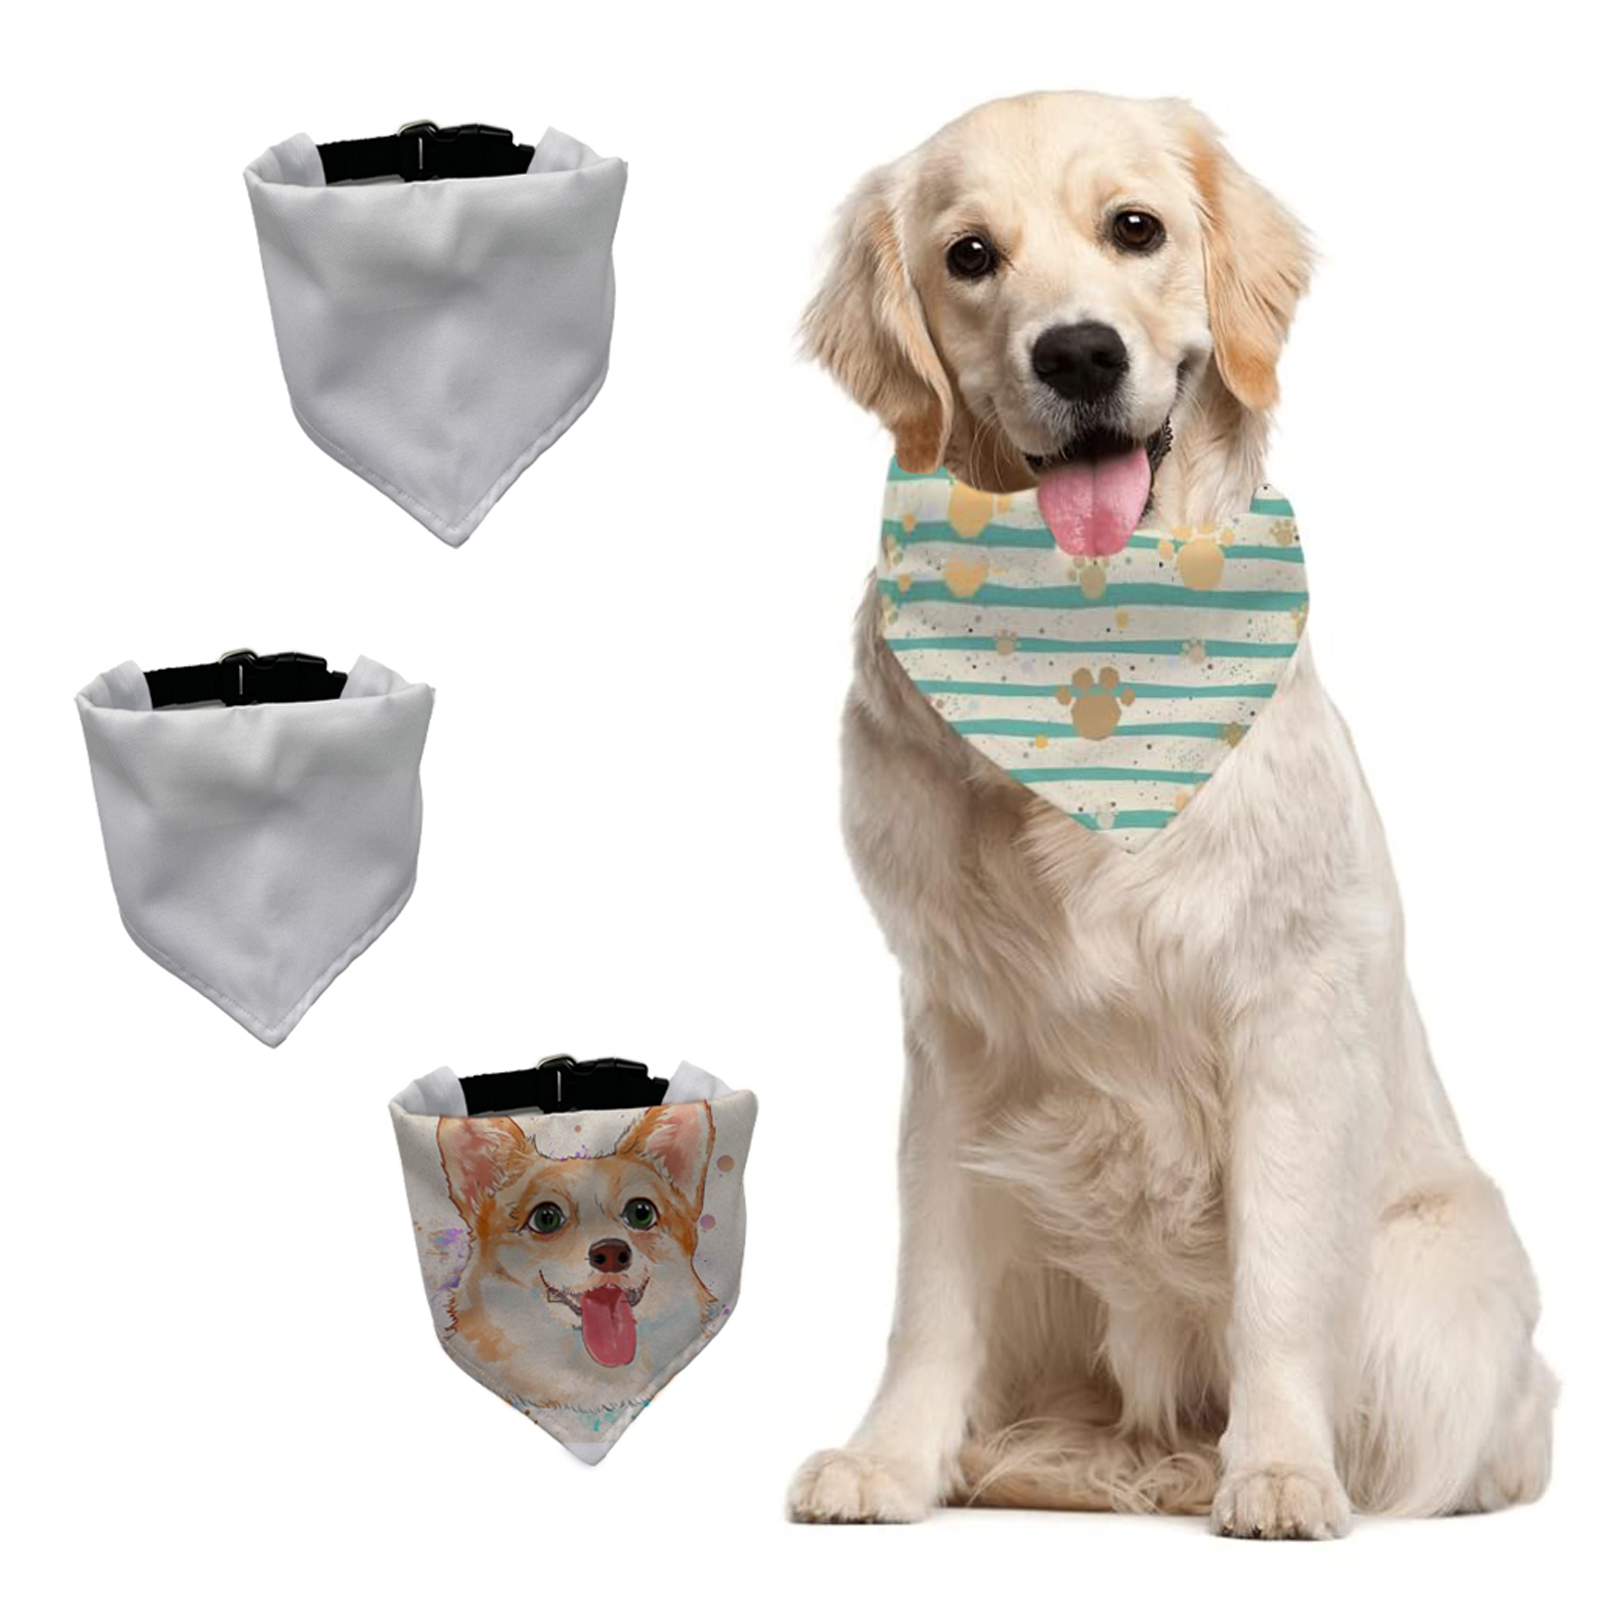 CALCA 15pcs Sublimation Blank Pet Bandana Pet Scarf Heat Transfer Washable Triangle Pet Accessorie for Dogs Puppy Cats with Adjustable Black Buckle M & L